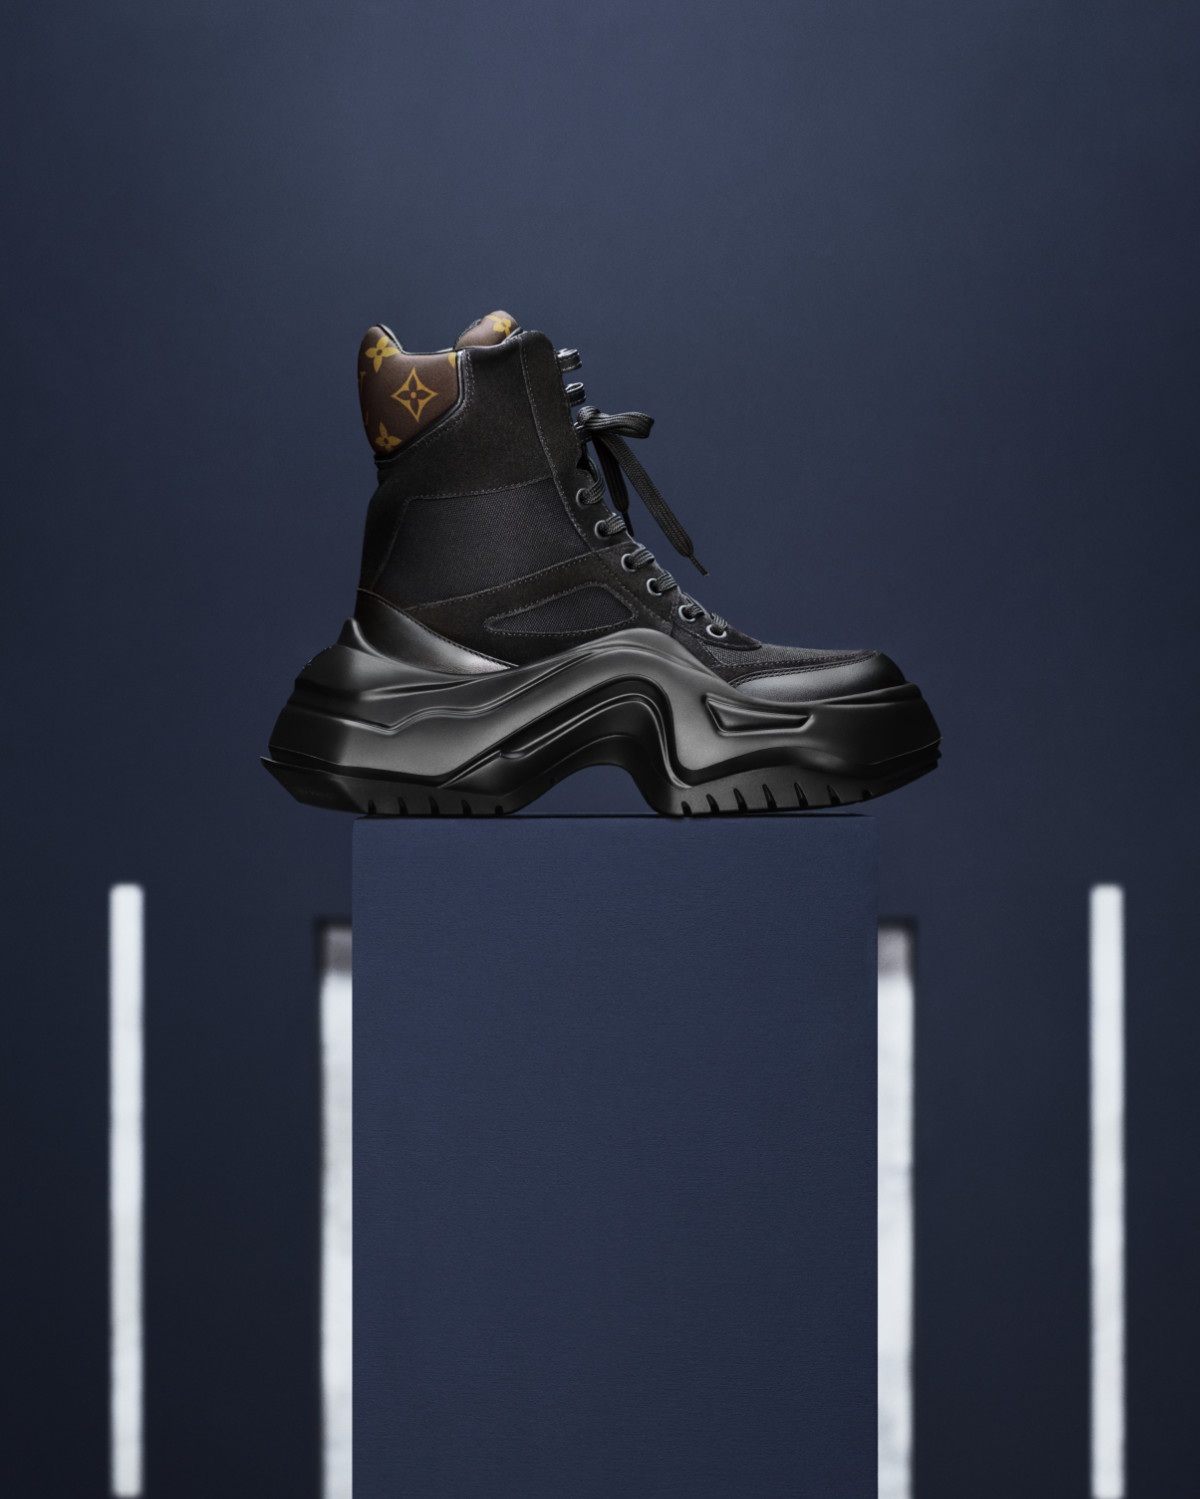 Louis Vuitton Unveiled Its New Campaign Dedicated To LV Archlight Sneaker Collection